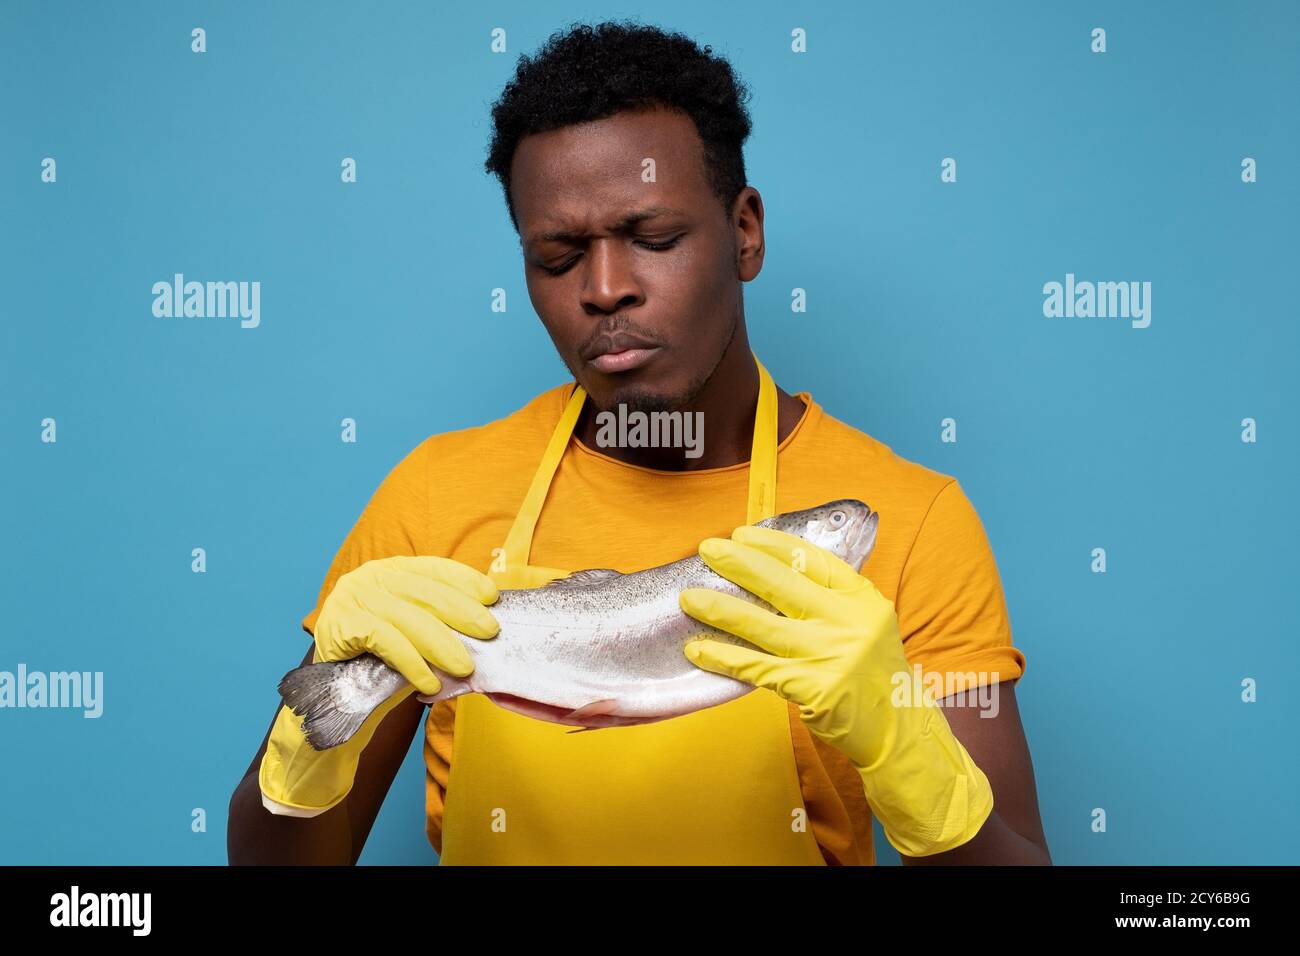 African young man in yellow apron and gloves examining smelly salmon fish Stock Photo